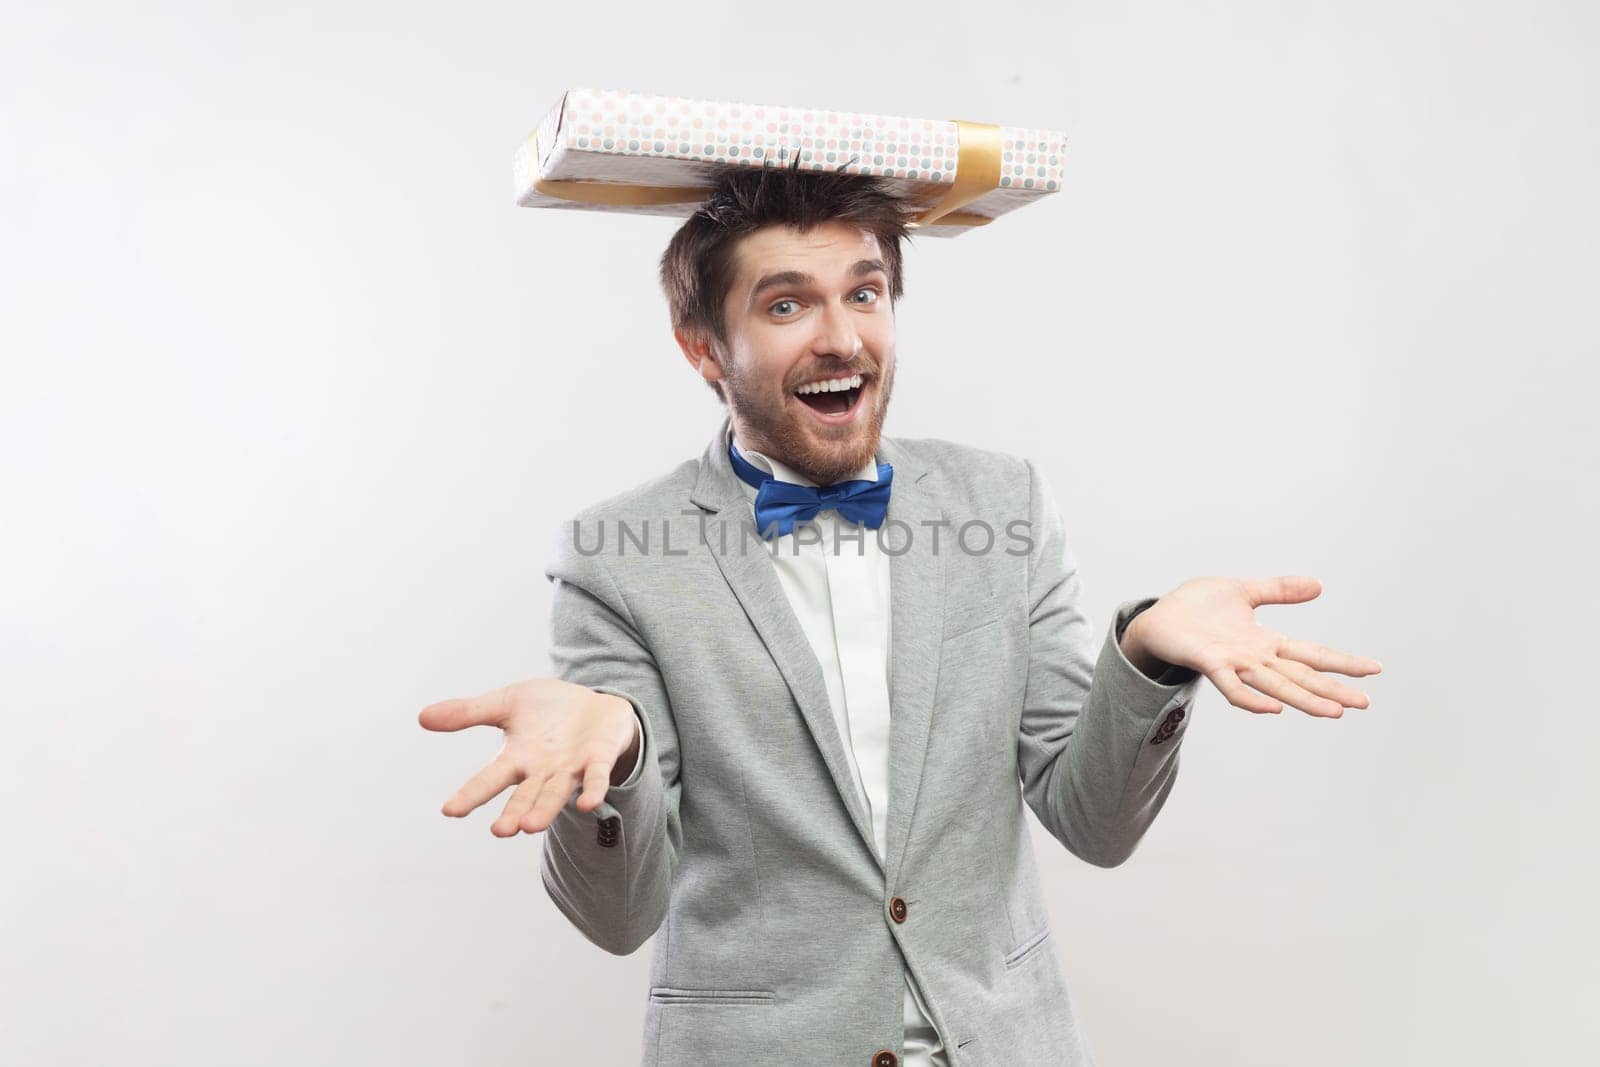 Portrait of joyful bearded man standing with present box on head, expressing happiness, saying take your gift, wearing grey suit and blue bow tie. Indoor studio shot isolated on gray background.